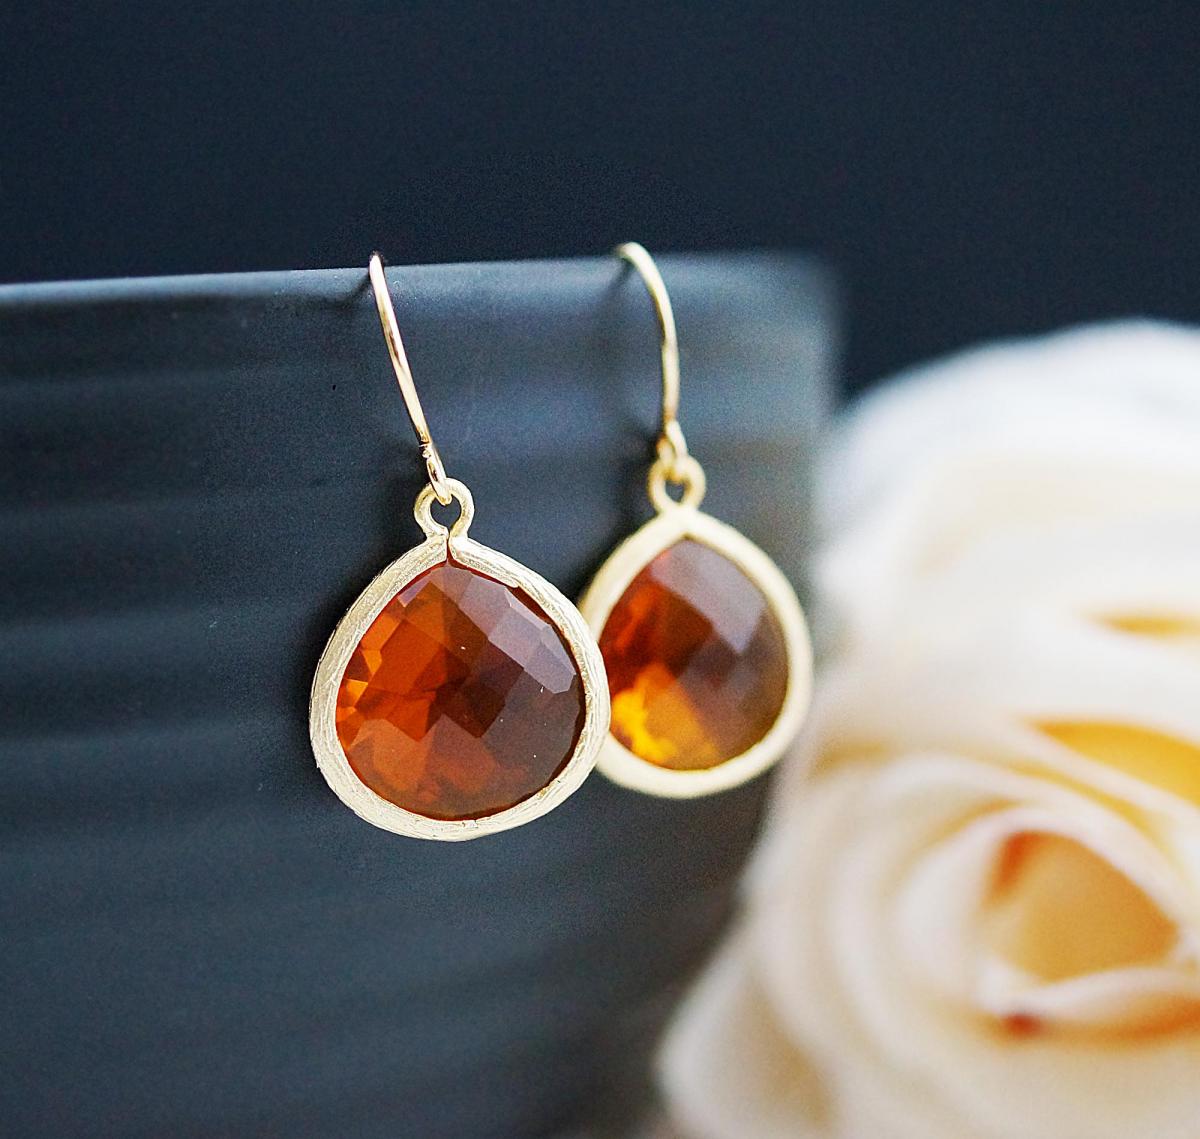 Wedding Jewelry Bridesmaid Jewelry Bridal Earrings Bridesmaid Earrings Dangle Earrings Orange Fire Opal Glass Gold Trimmed Earrings